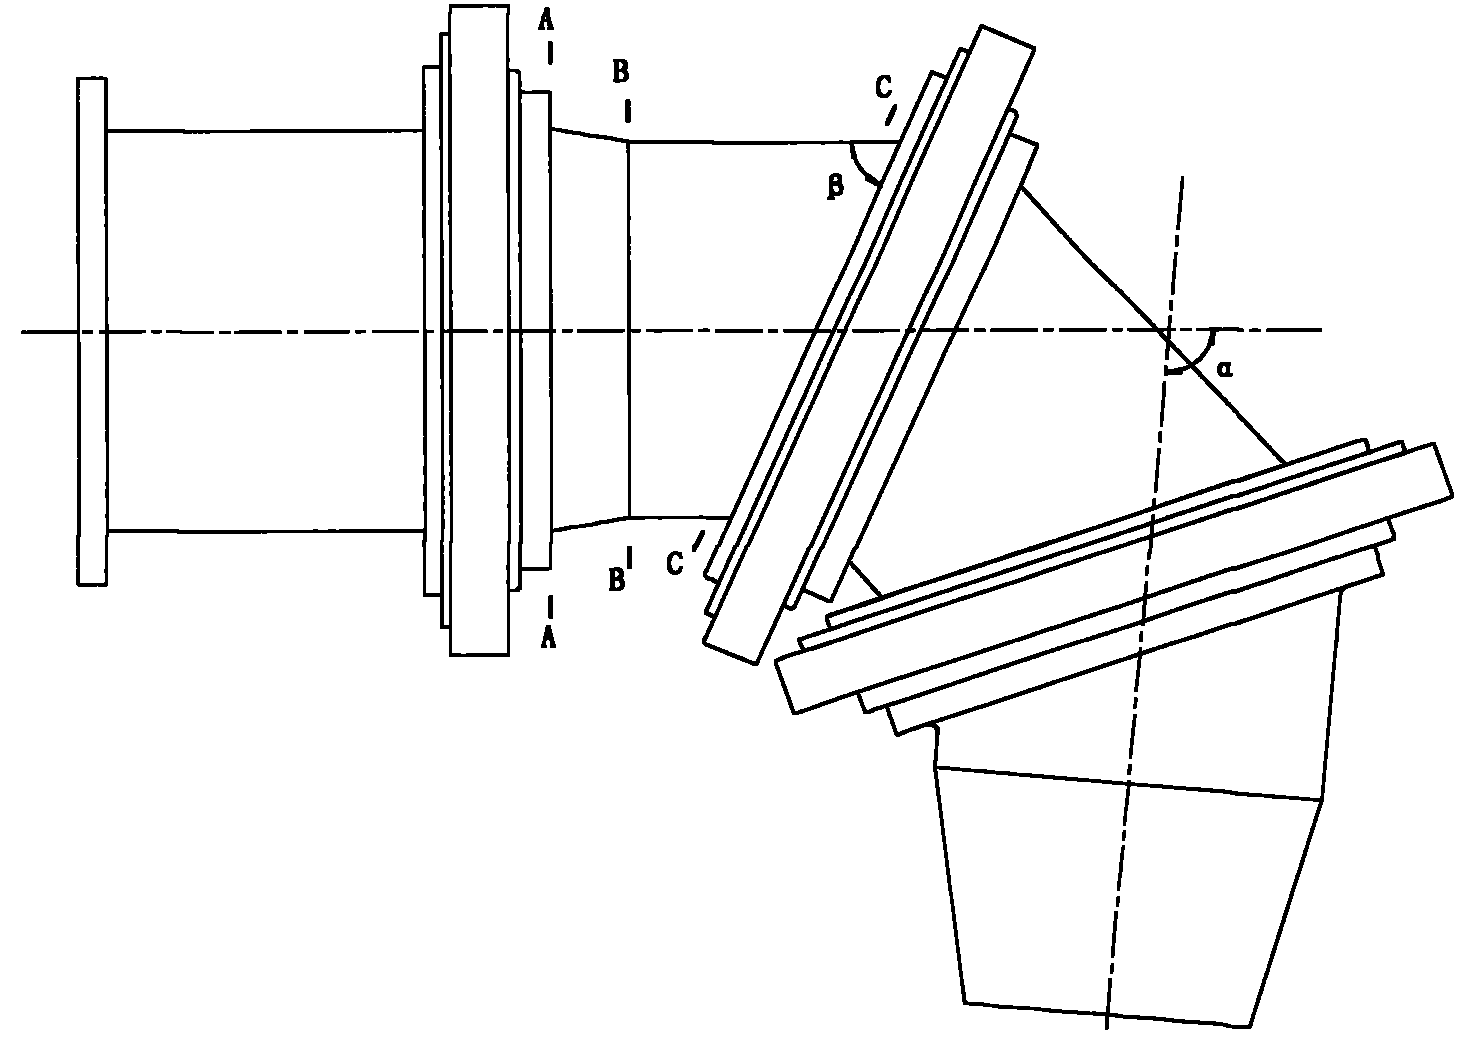 Rotary thrust vectoring nozzle for short-distance vertical take-off and landing engine